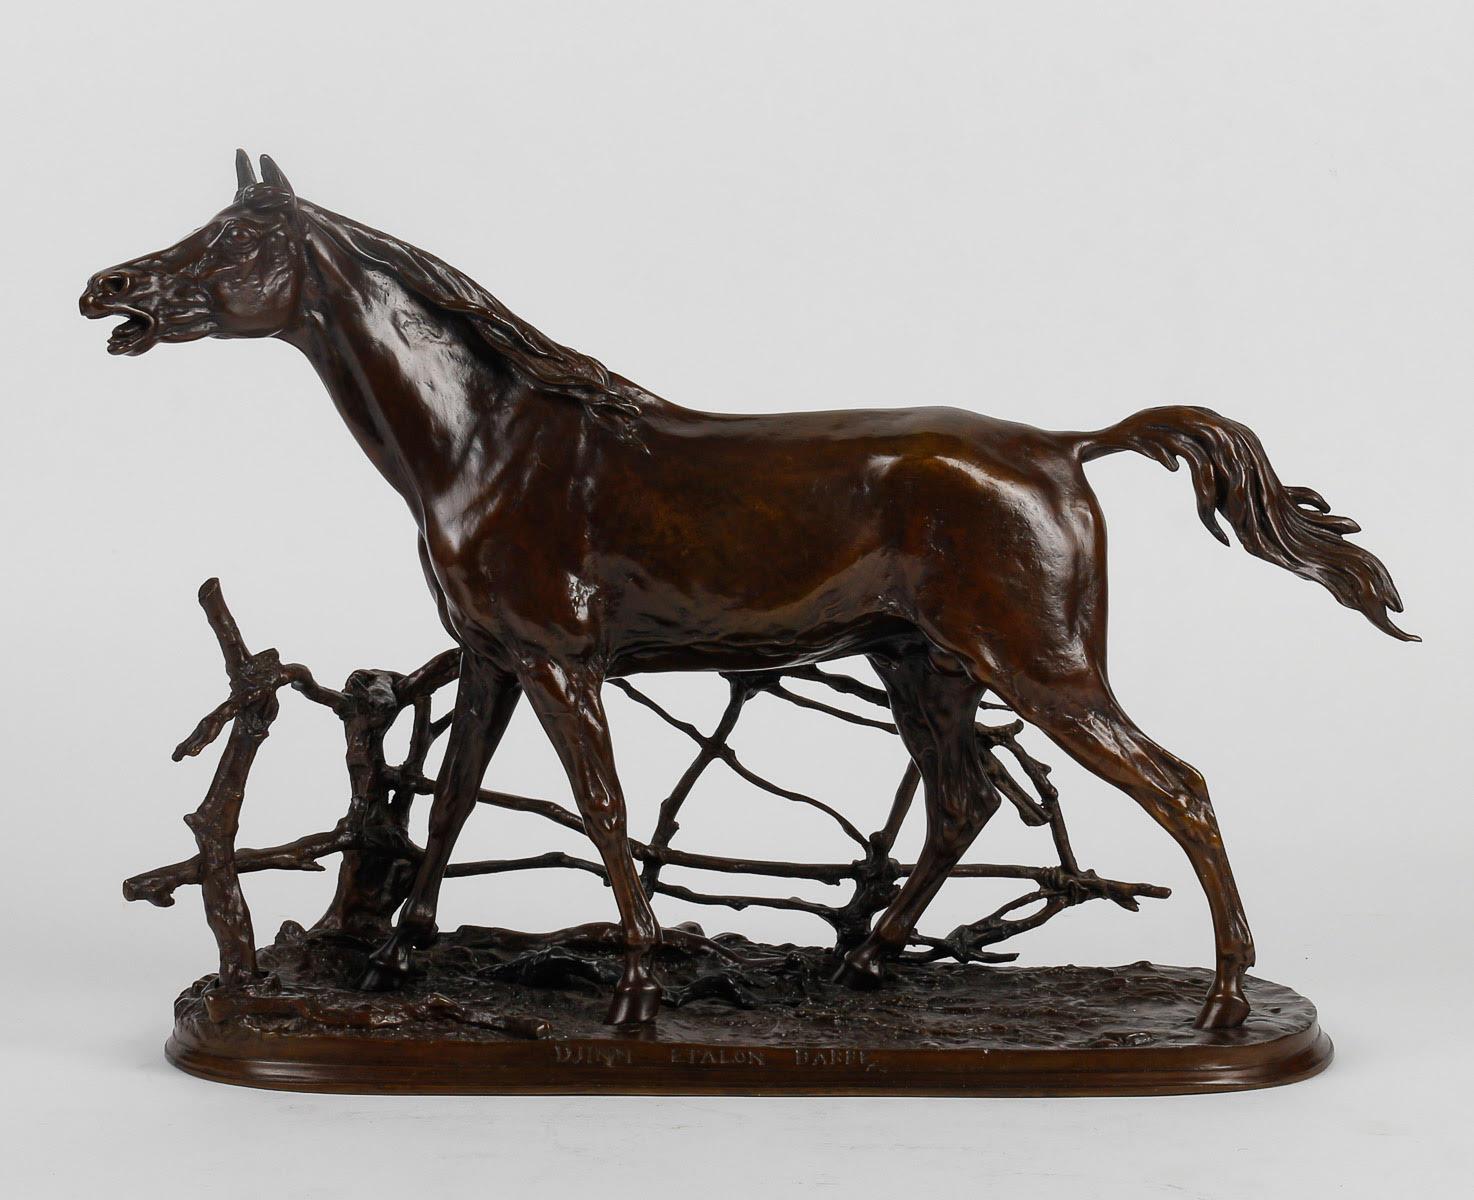 French Bronze Sculpture of a Horse in its Enclosure, 20th Century.